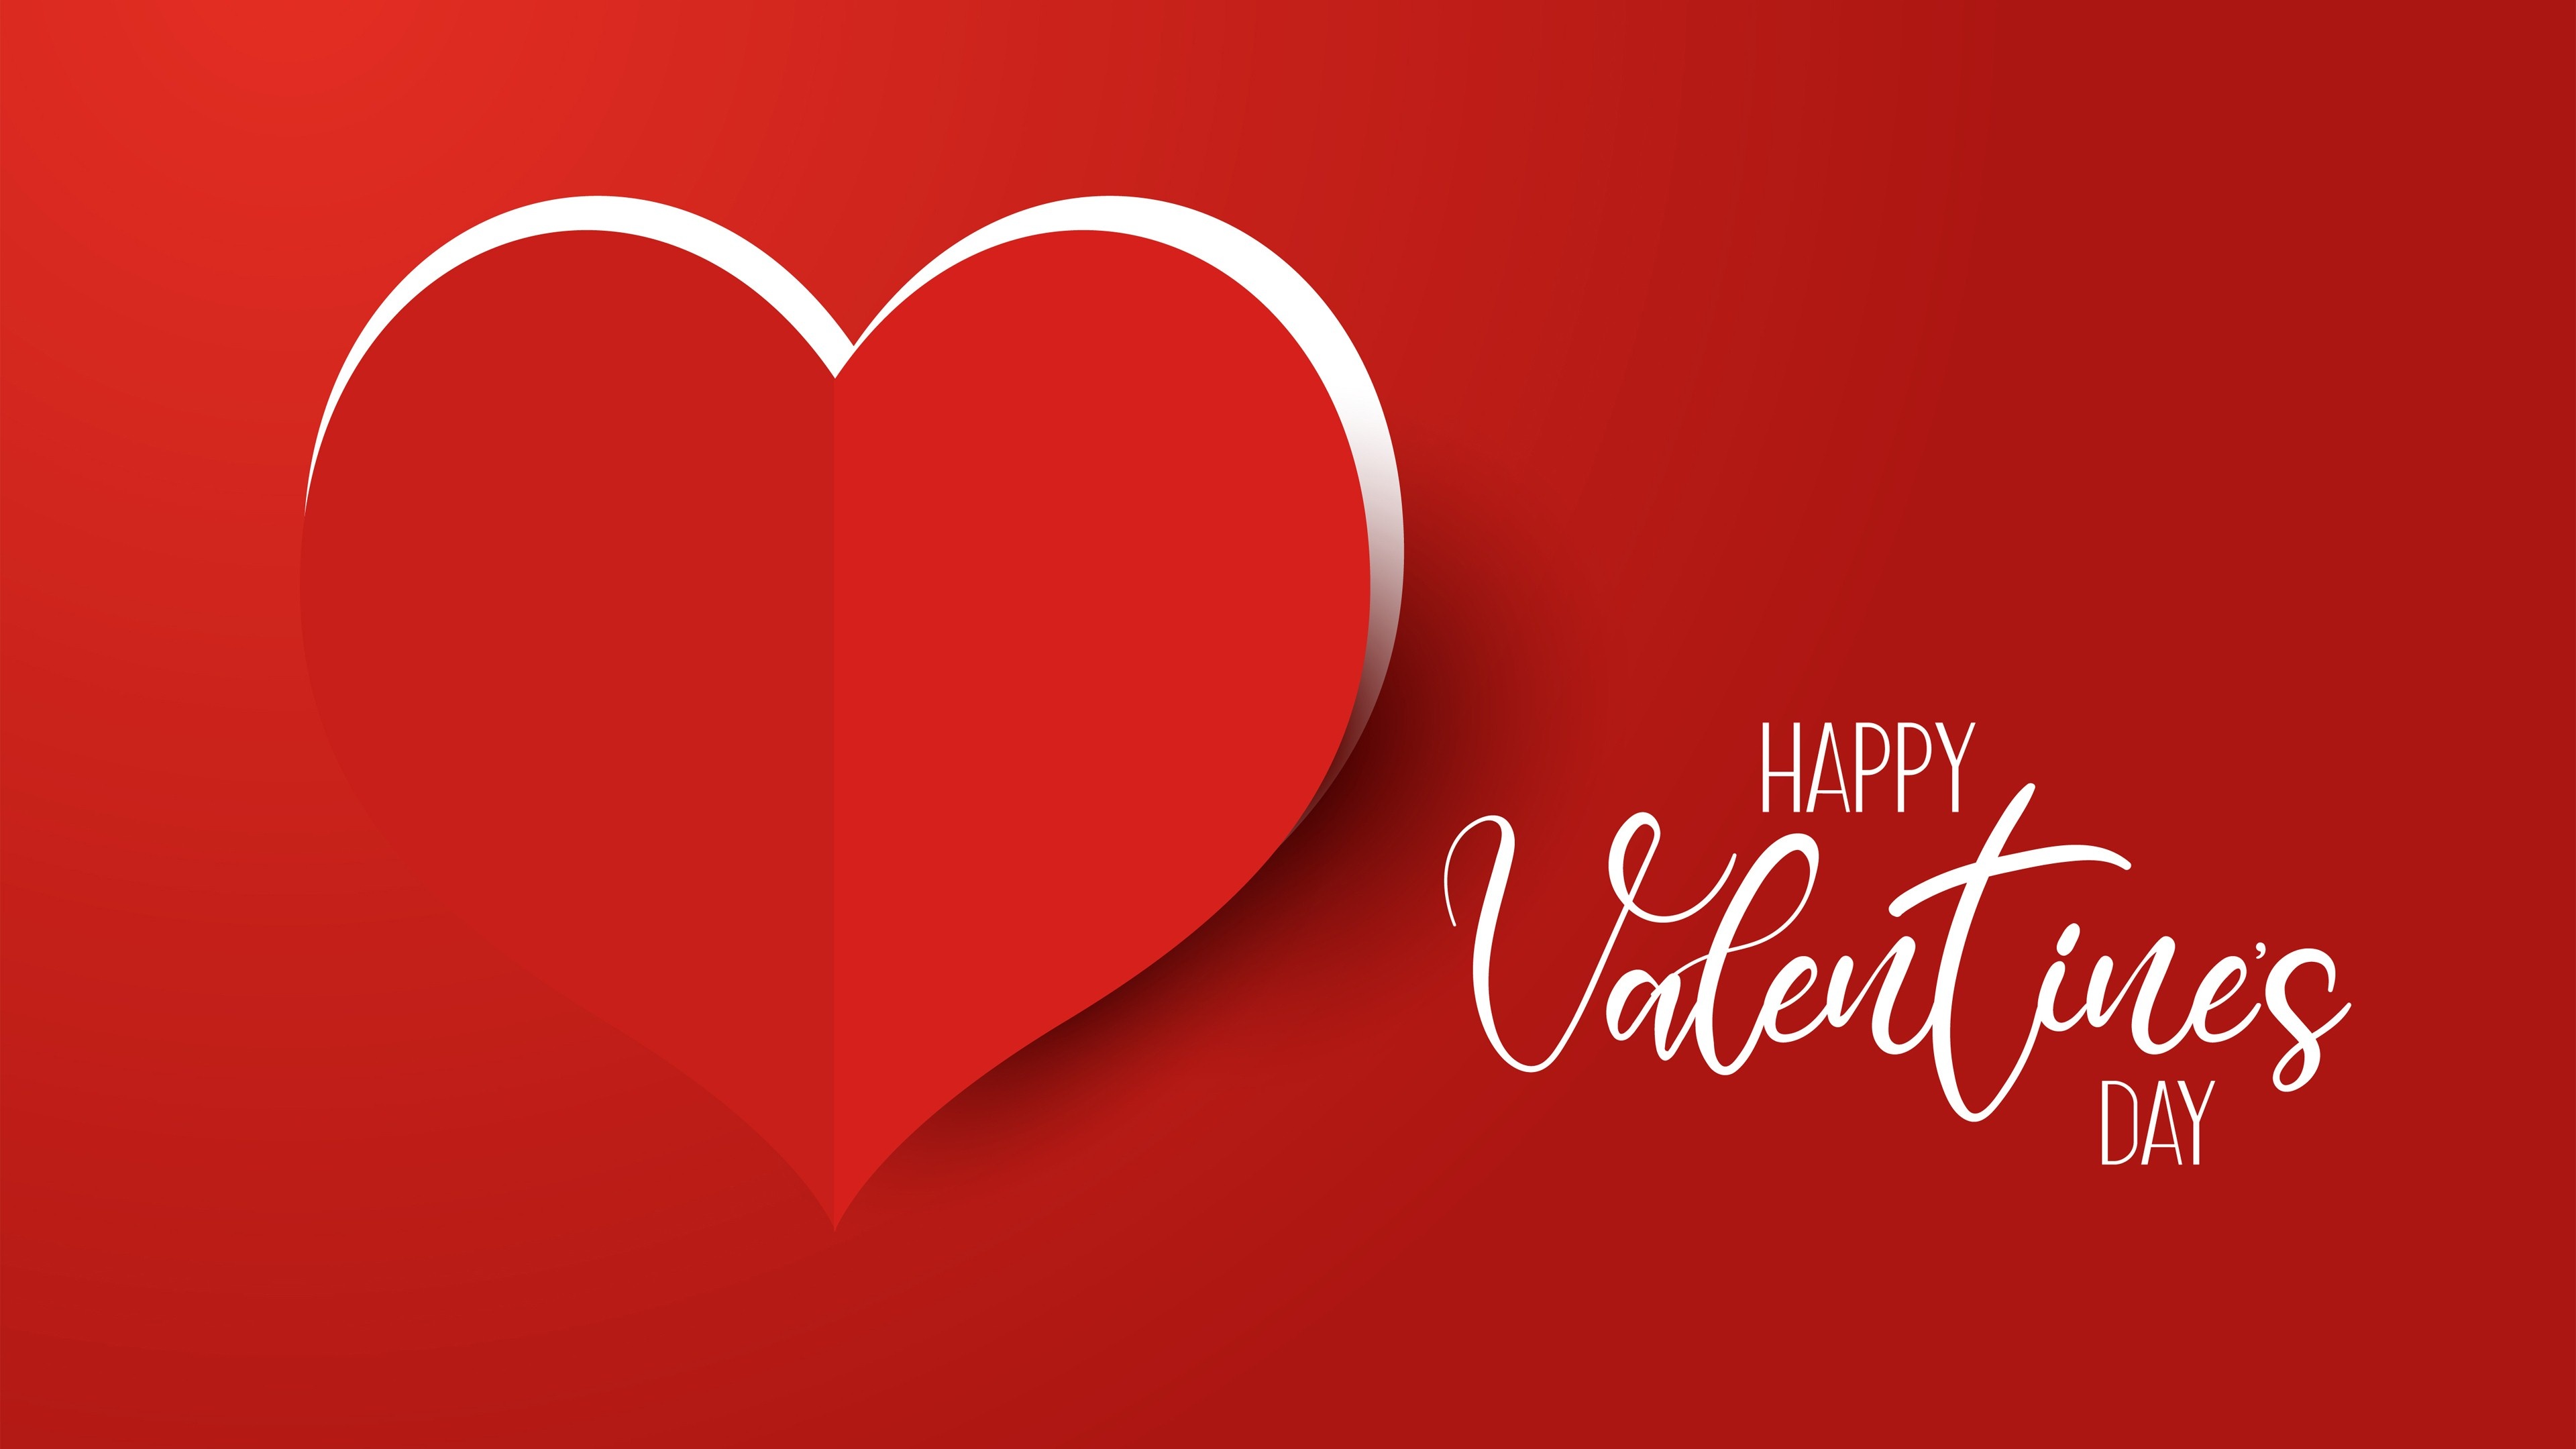 Free download Beautiful Valentines Day Red 4K Wallpaper HD Wallpapersfor your Desktop, Mobile \u0026 Tablet | Explore 55+ Beautiful Valentine Wallpapers | Beautiful Day Wallpaper, Free Valentine Wallpaper, Valentine Screensavers and Wallpaper 3840x2160